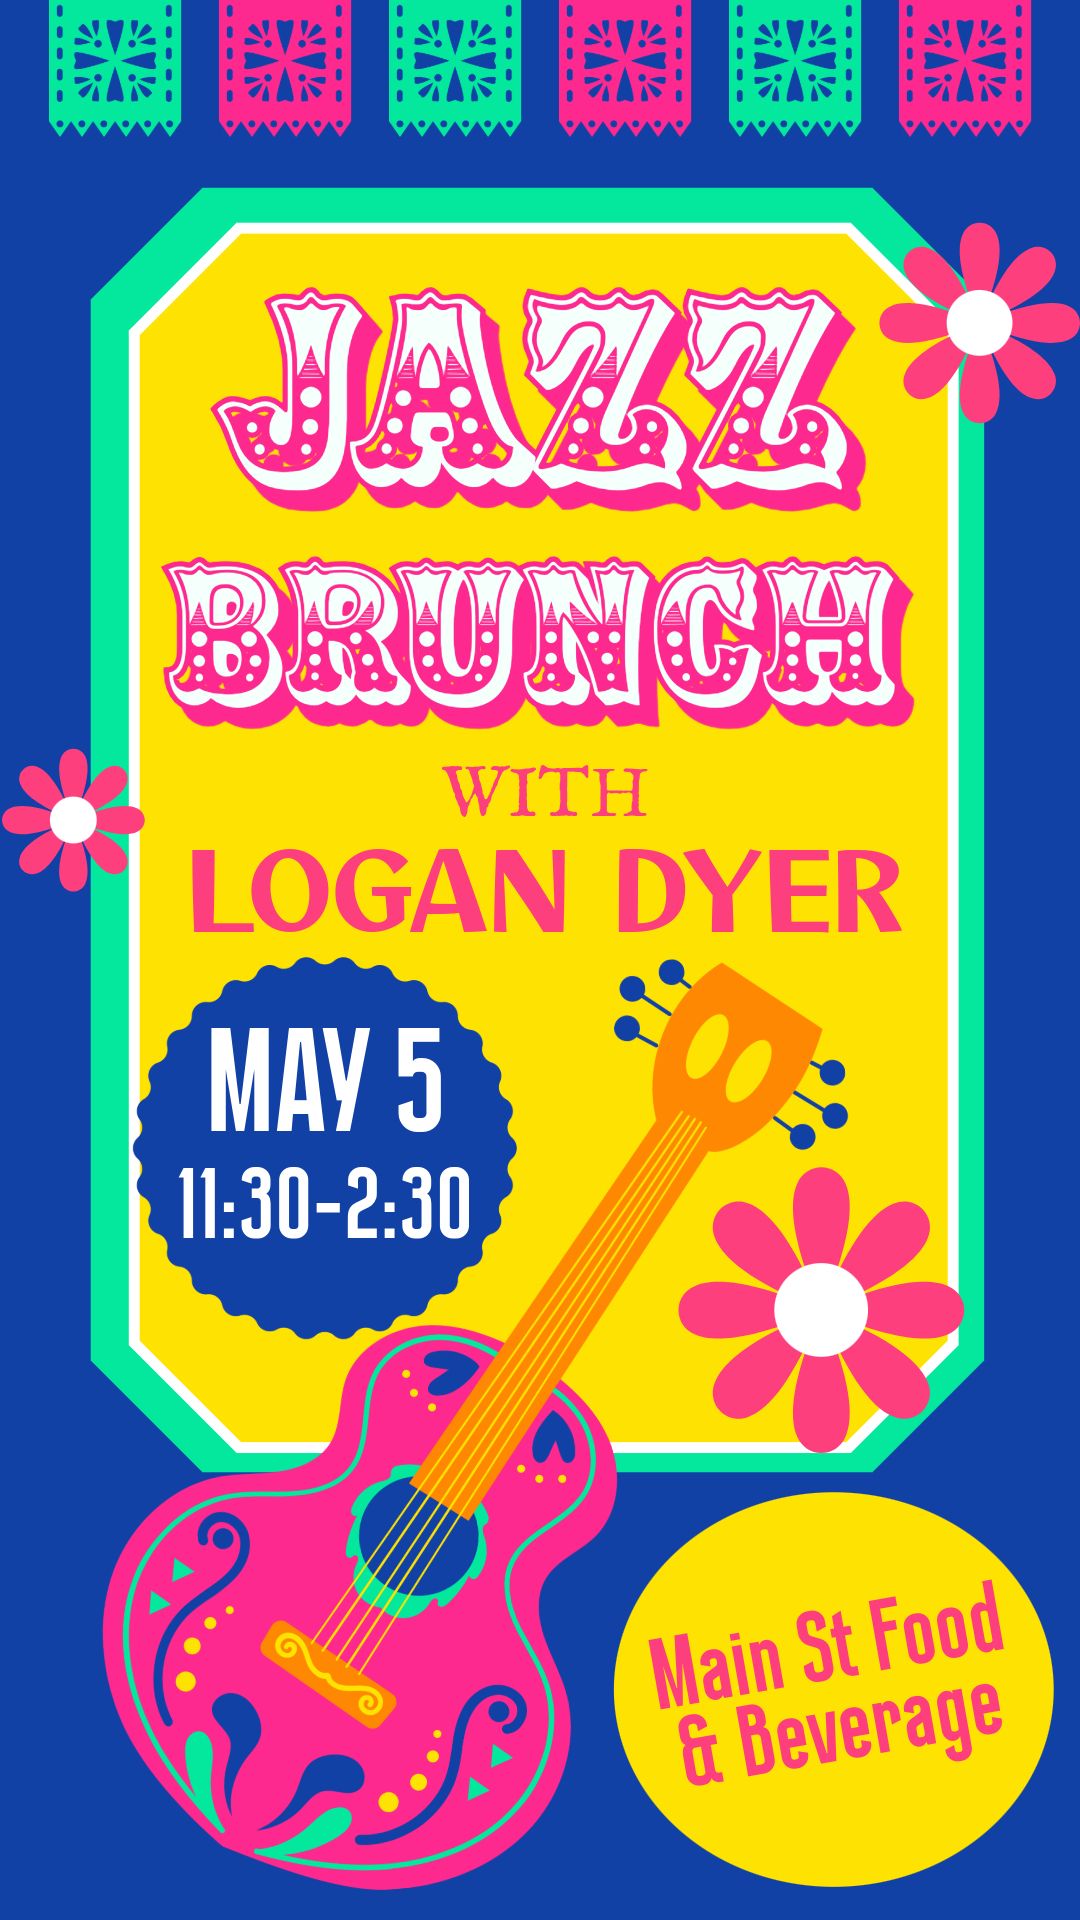 Main St Food & Beverage - Jazz Brunch with Logan Dyer & Special Guest Jonas Cowan on May 5th